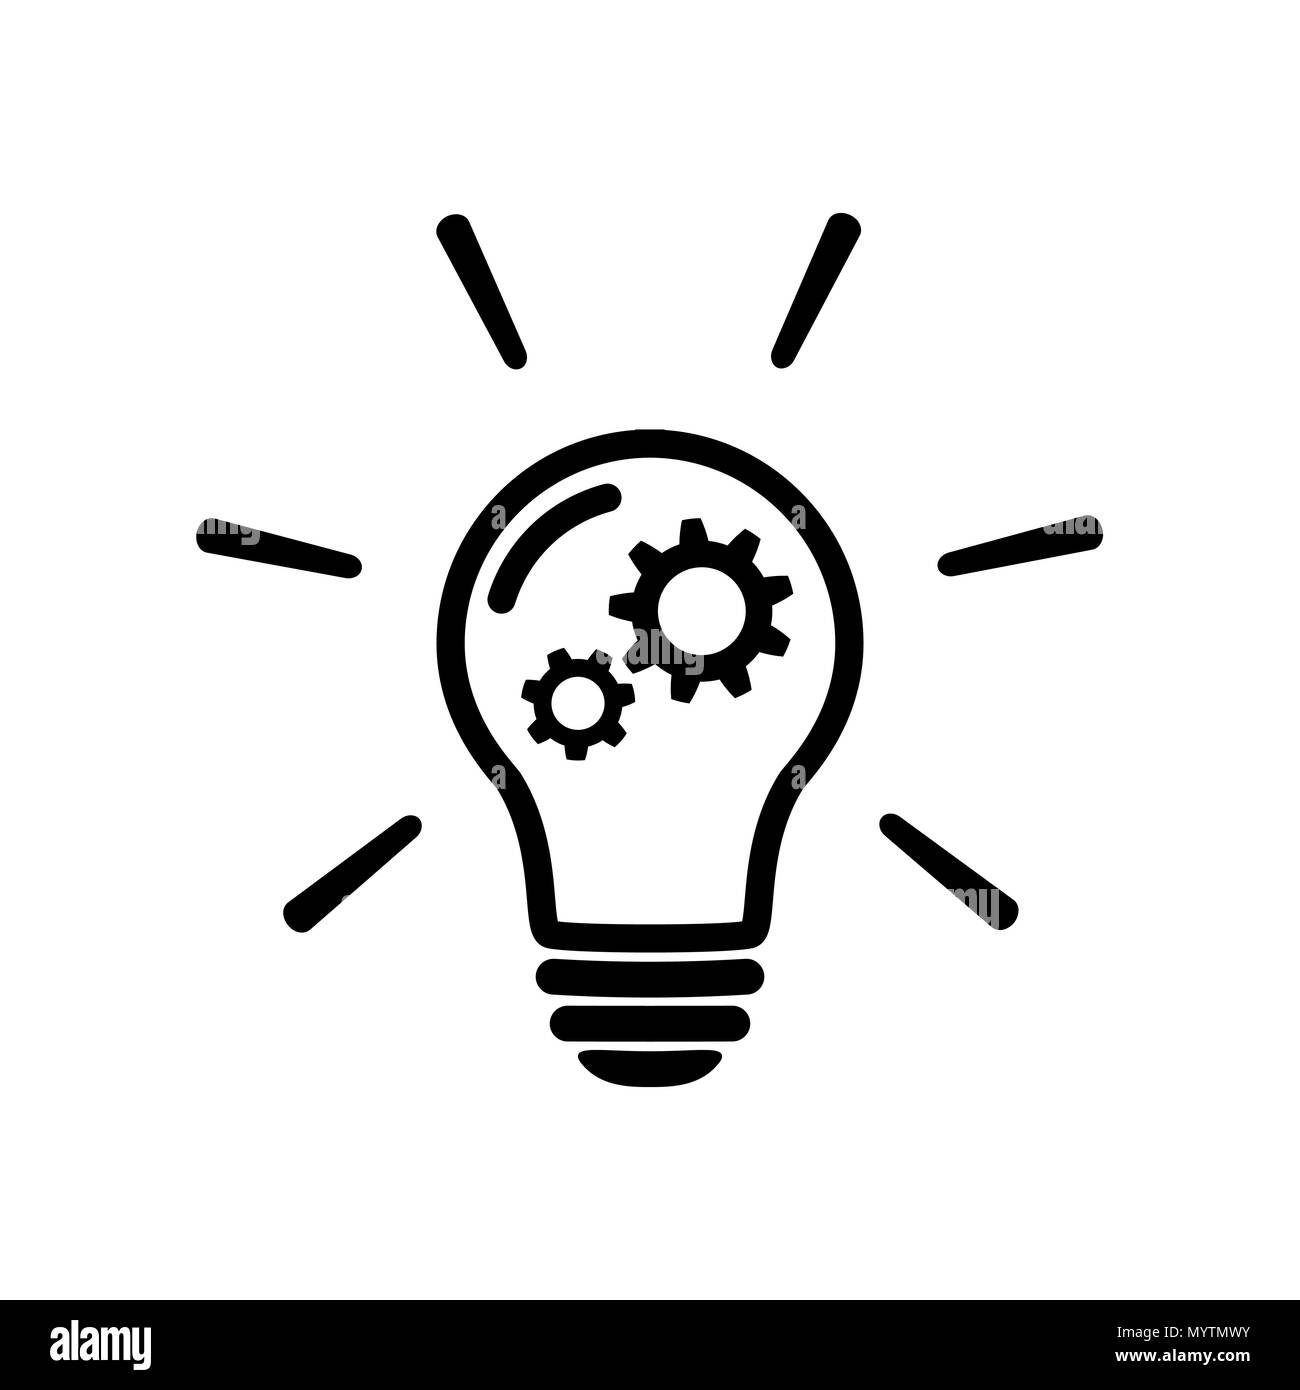 innovation concept icon. Light bulb with gear sign Stock Vector